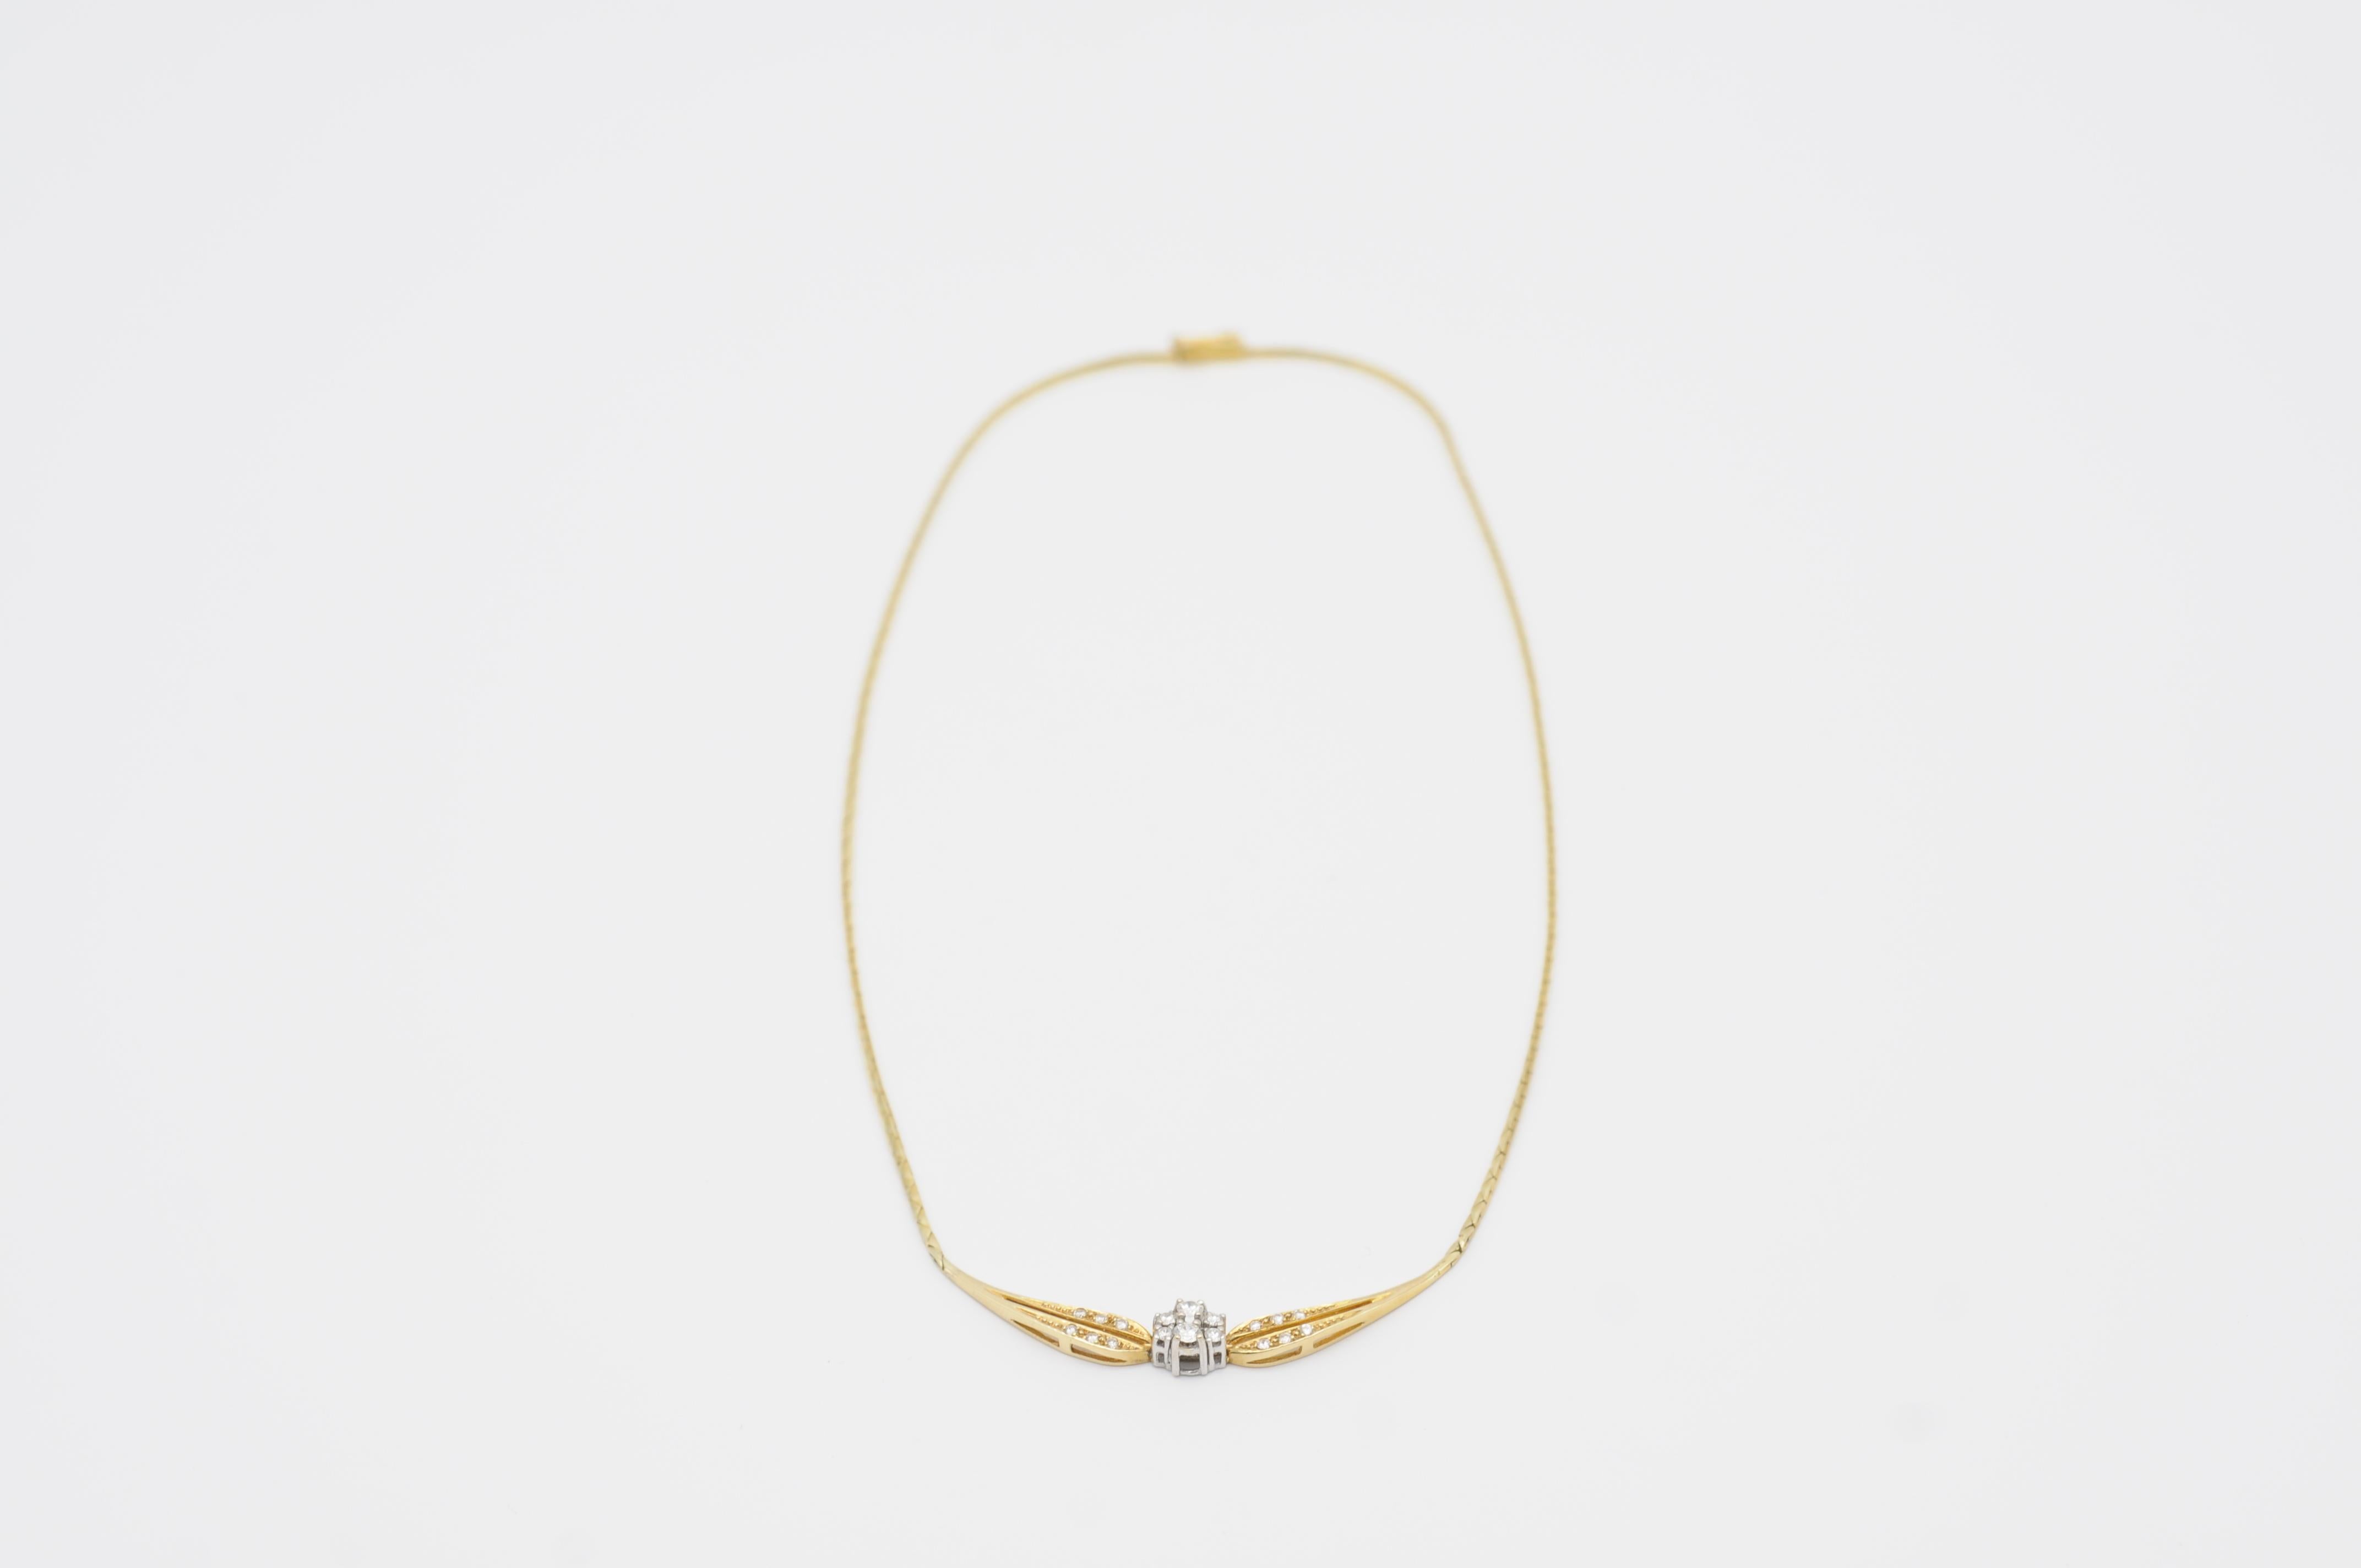 
Introducing the epitome of sophistication and elegance - a brilliant necklace made of 14 carat yellow gold. This exquisite piece of jewelry will take your breath away with its impeccable craftsmanship and luxurious design.

Featuring a total carat